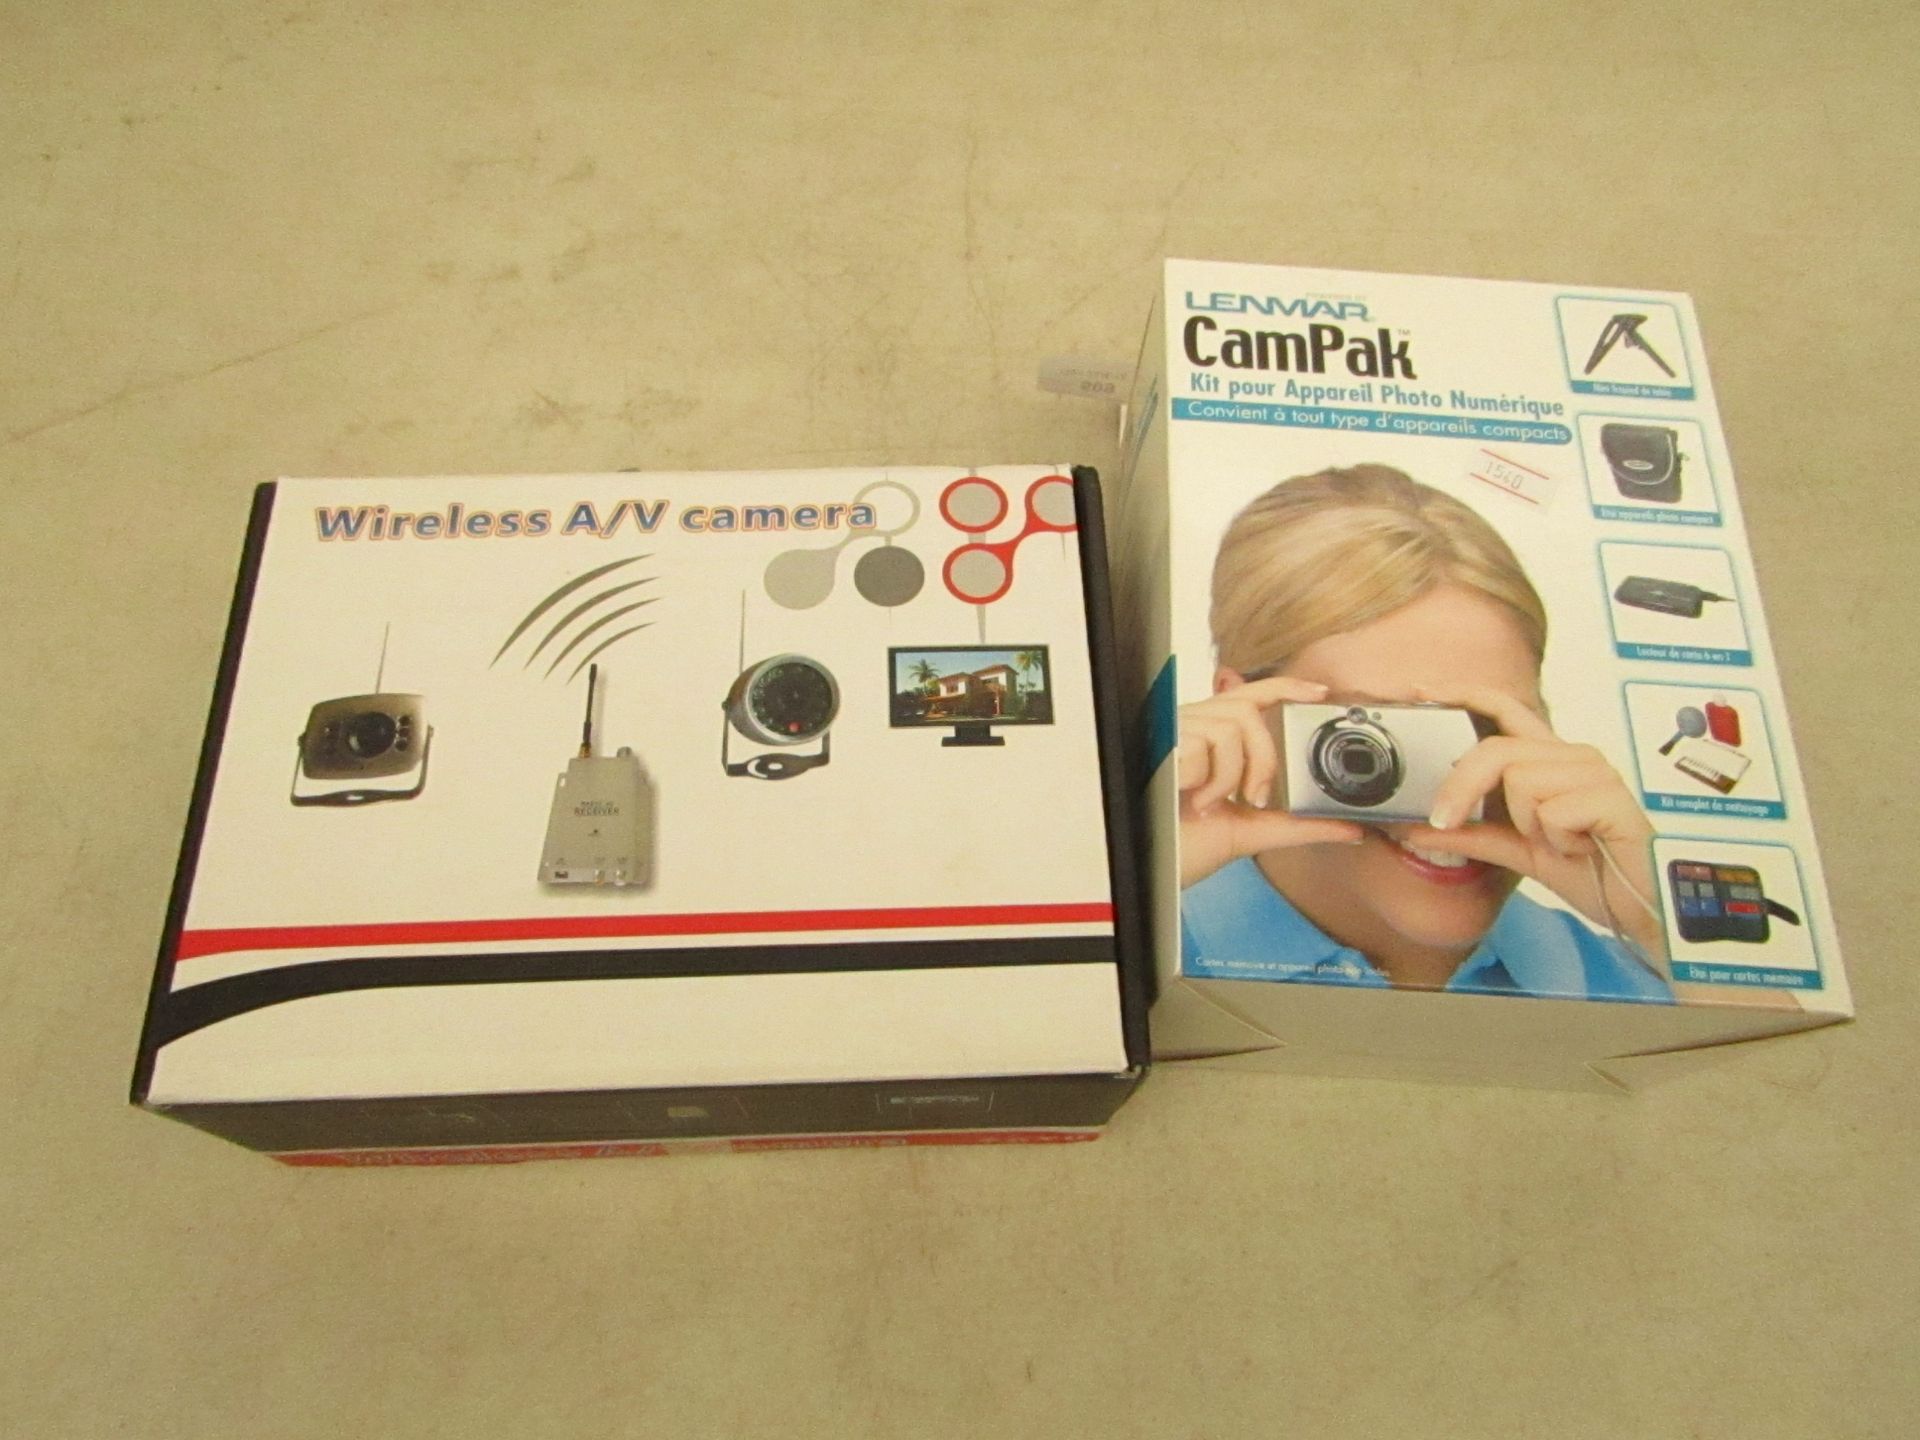 4x Items being; 2x Lenmar campak photo kit, both unchecked and boxed 2x Wireless A/V camera, both